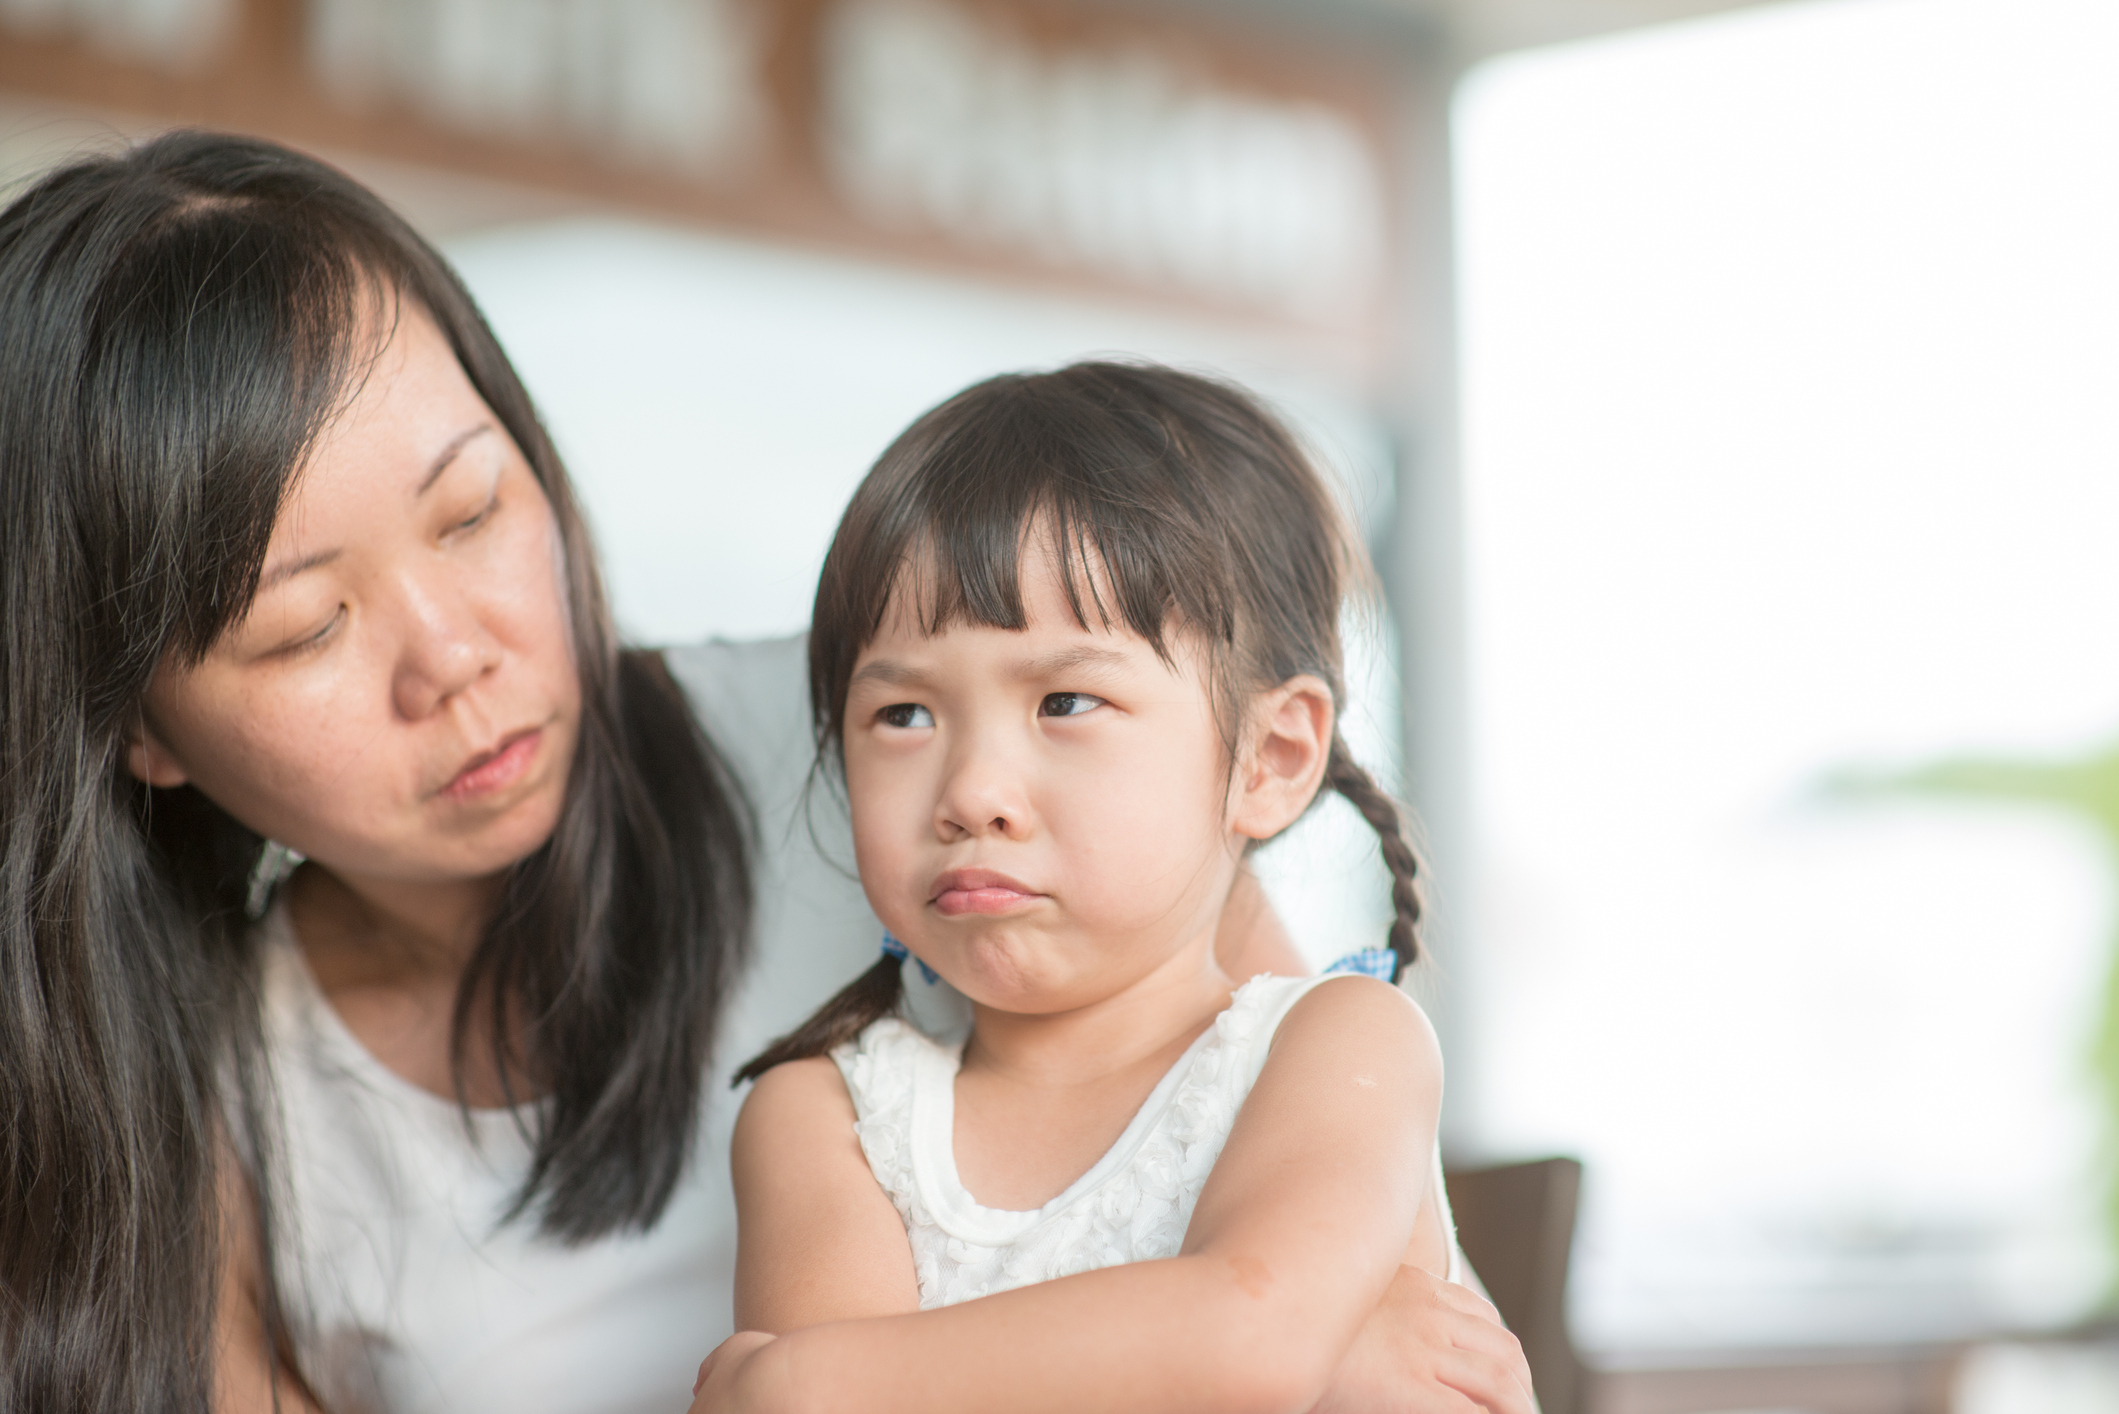 Dealing With Acts of Aggression from Your Child